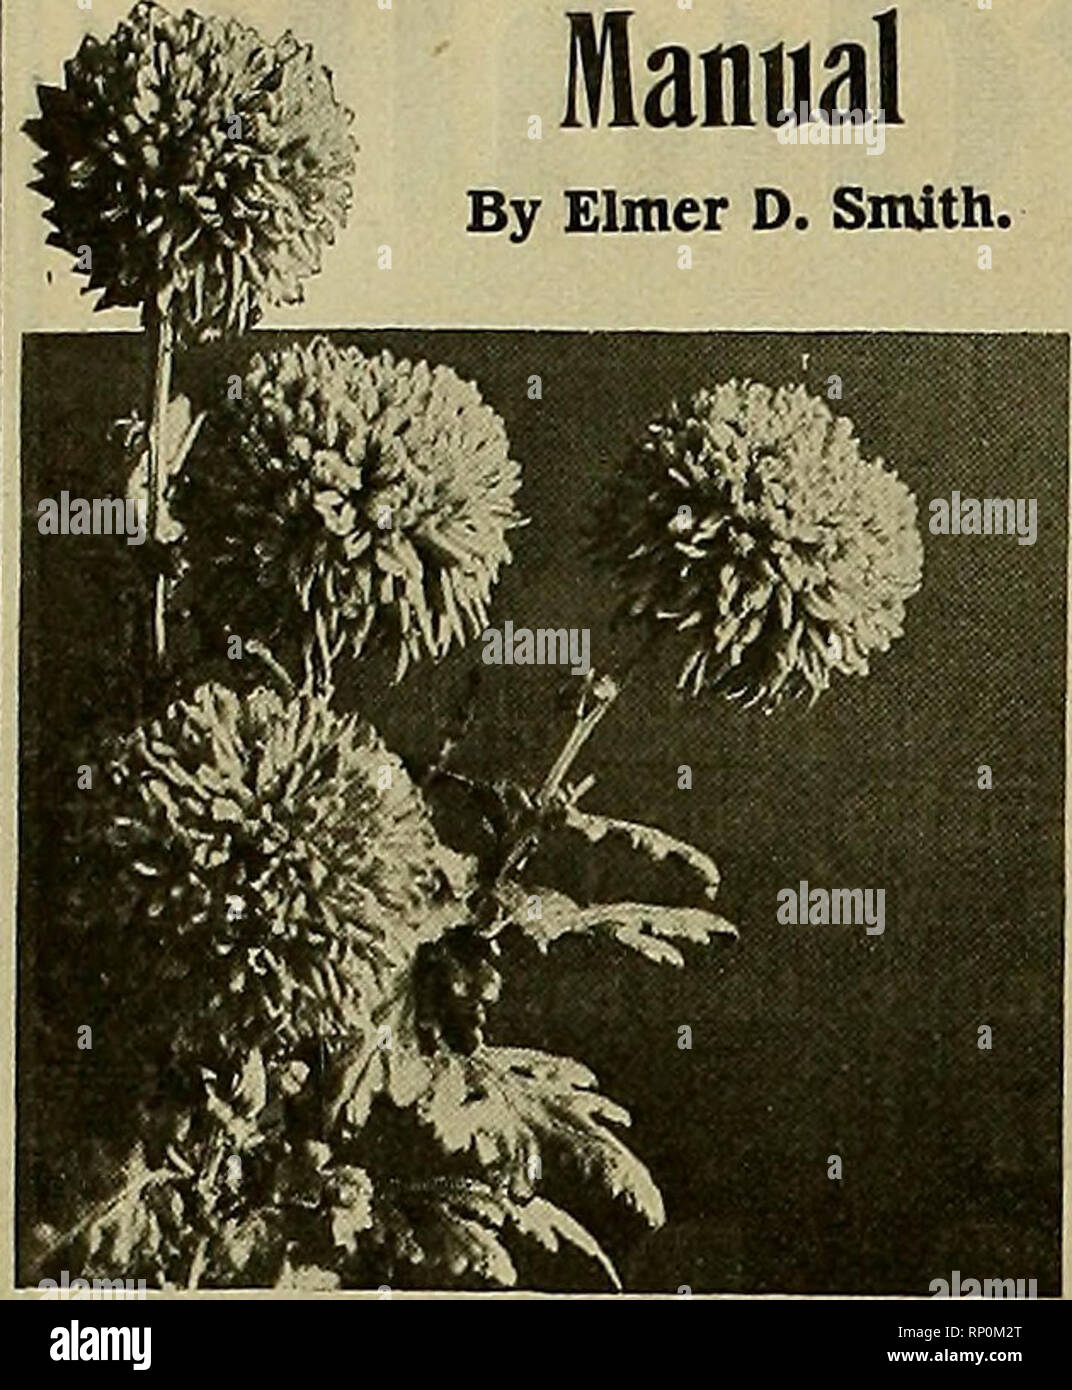 . The American florist : a weekly journal for the trade. Floriculture; Florists. 214 The American Florist. Aug. i6. The Chrysanthemum Manual By Elmer D. Smith.. NEW AND REVISED EDITION. Price 50 Cents. Cash With Order. AMERICAN FLORIST CO., 440 S. Dearborn St., CHICAGO. OI I IfII SPLENDENS and BONFIRE ?lAI Vlll Good Strong Plants from Soil. &quot;&quot;*? • '&quot; 60 cents per 100; $5.00 oer 1000. Dracaena Indivisa, 2-inch. .•,.-;V.$2.00 per 100. Geraniums, 2-inch 1.85 pei 100. Cobea Scandfins, 2-inch 3.00 per 100. Marguerite, M rs. F. Sanders, 2-in. 2.00 per 100. Double Alysum, 2 inch 2.00 p Stock Photo